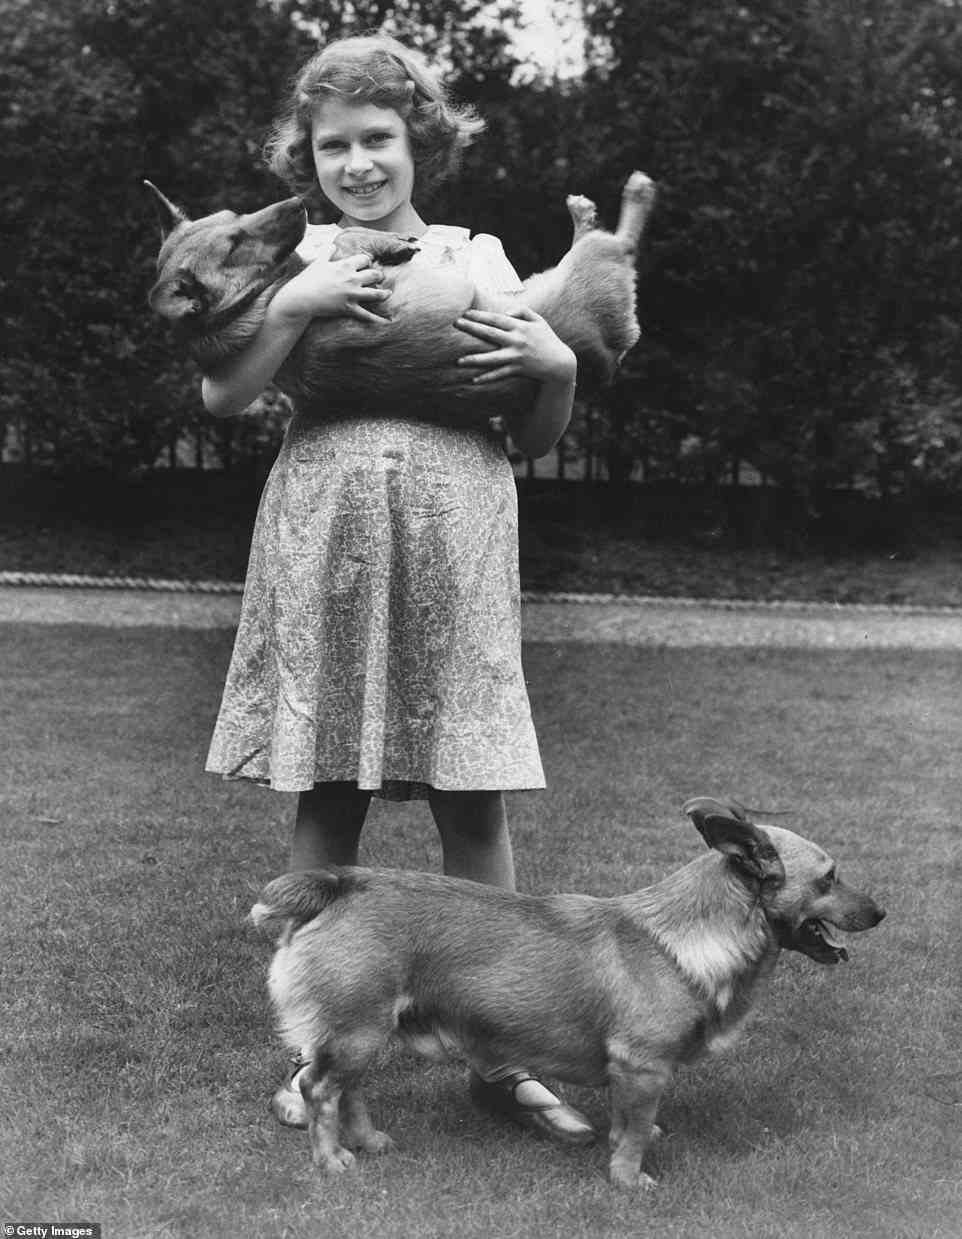 Princess Elizabeth, who grew up to become queen, with two corgi dogs at her home at 145 Piccadilly, London, July 1936